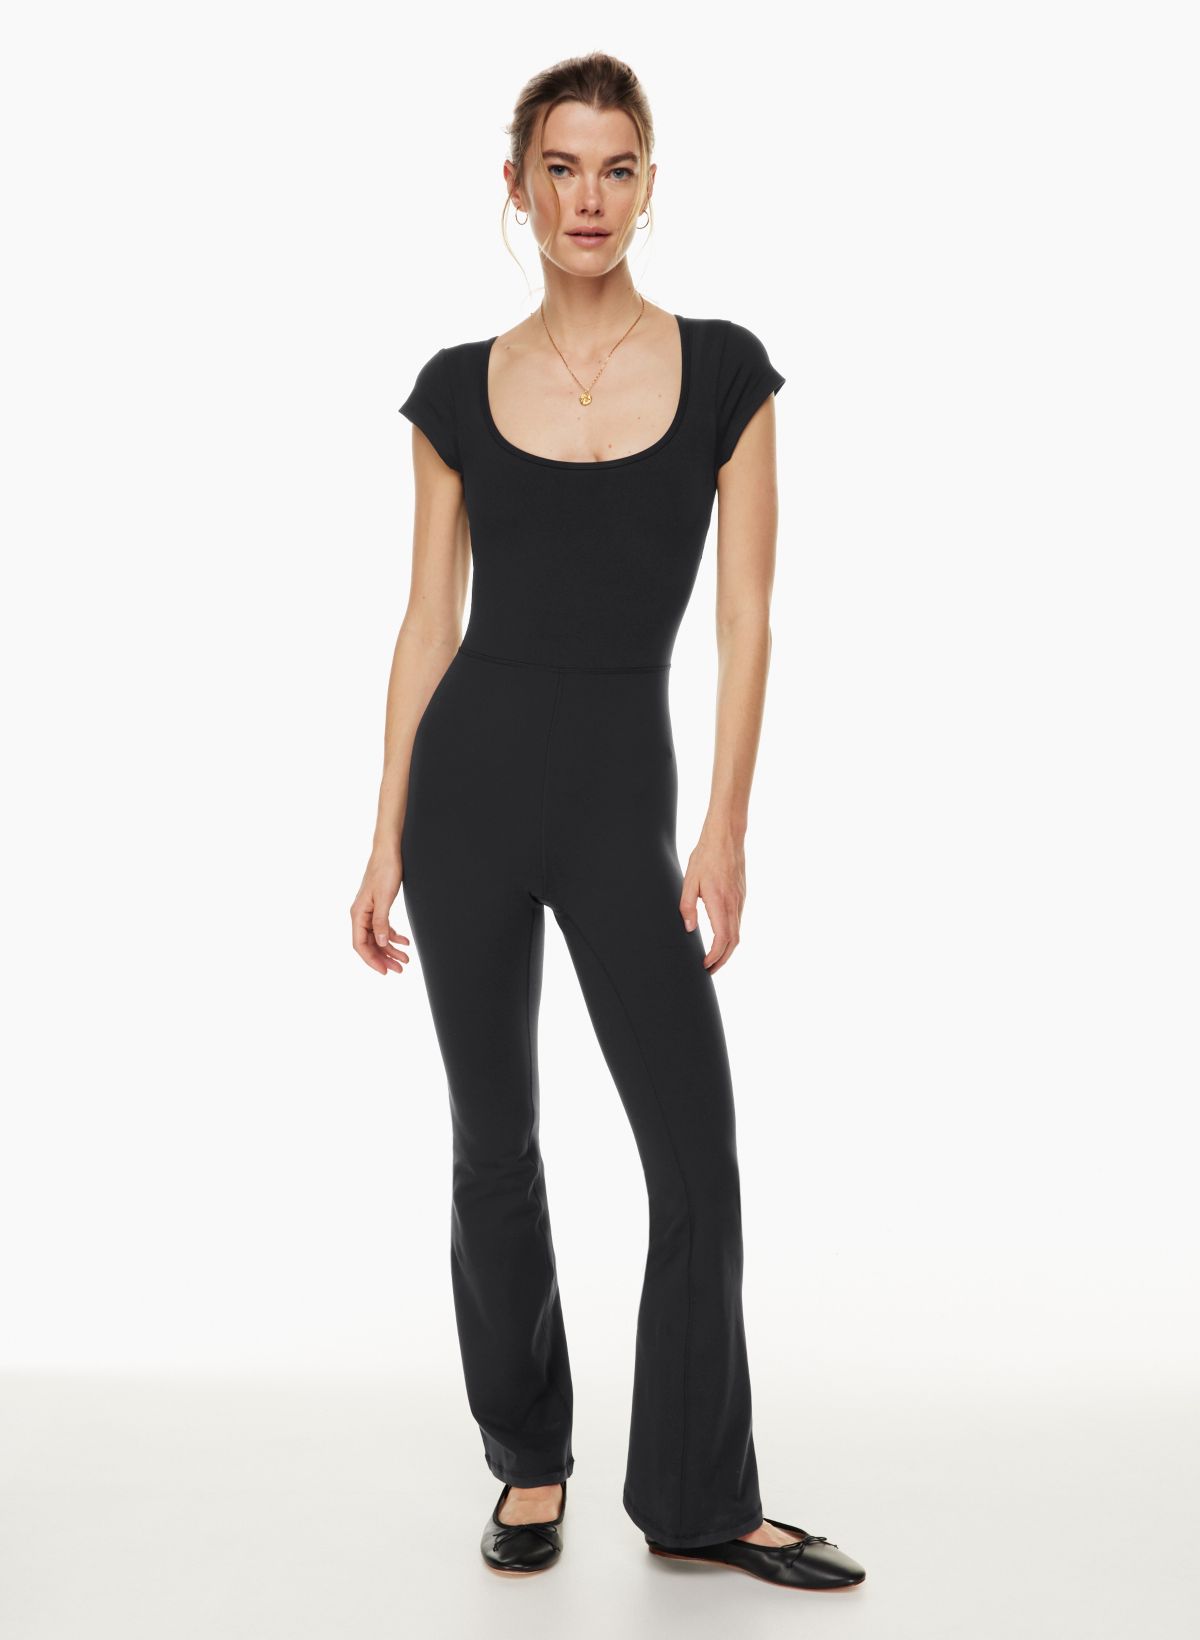 Aritzia Divinity Flare Jumpsuit Size L - $63 New With Tags - From